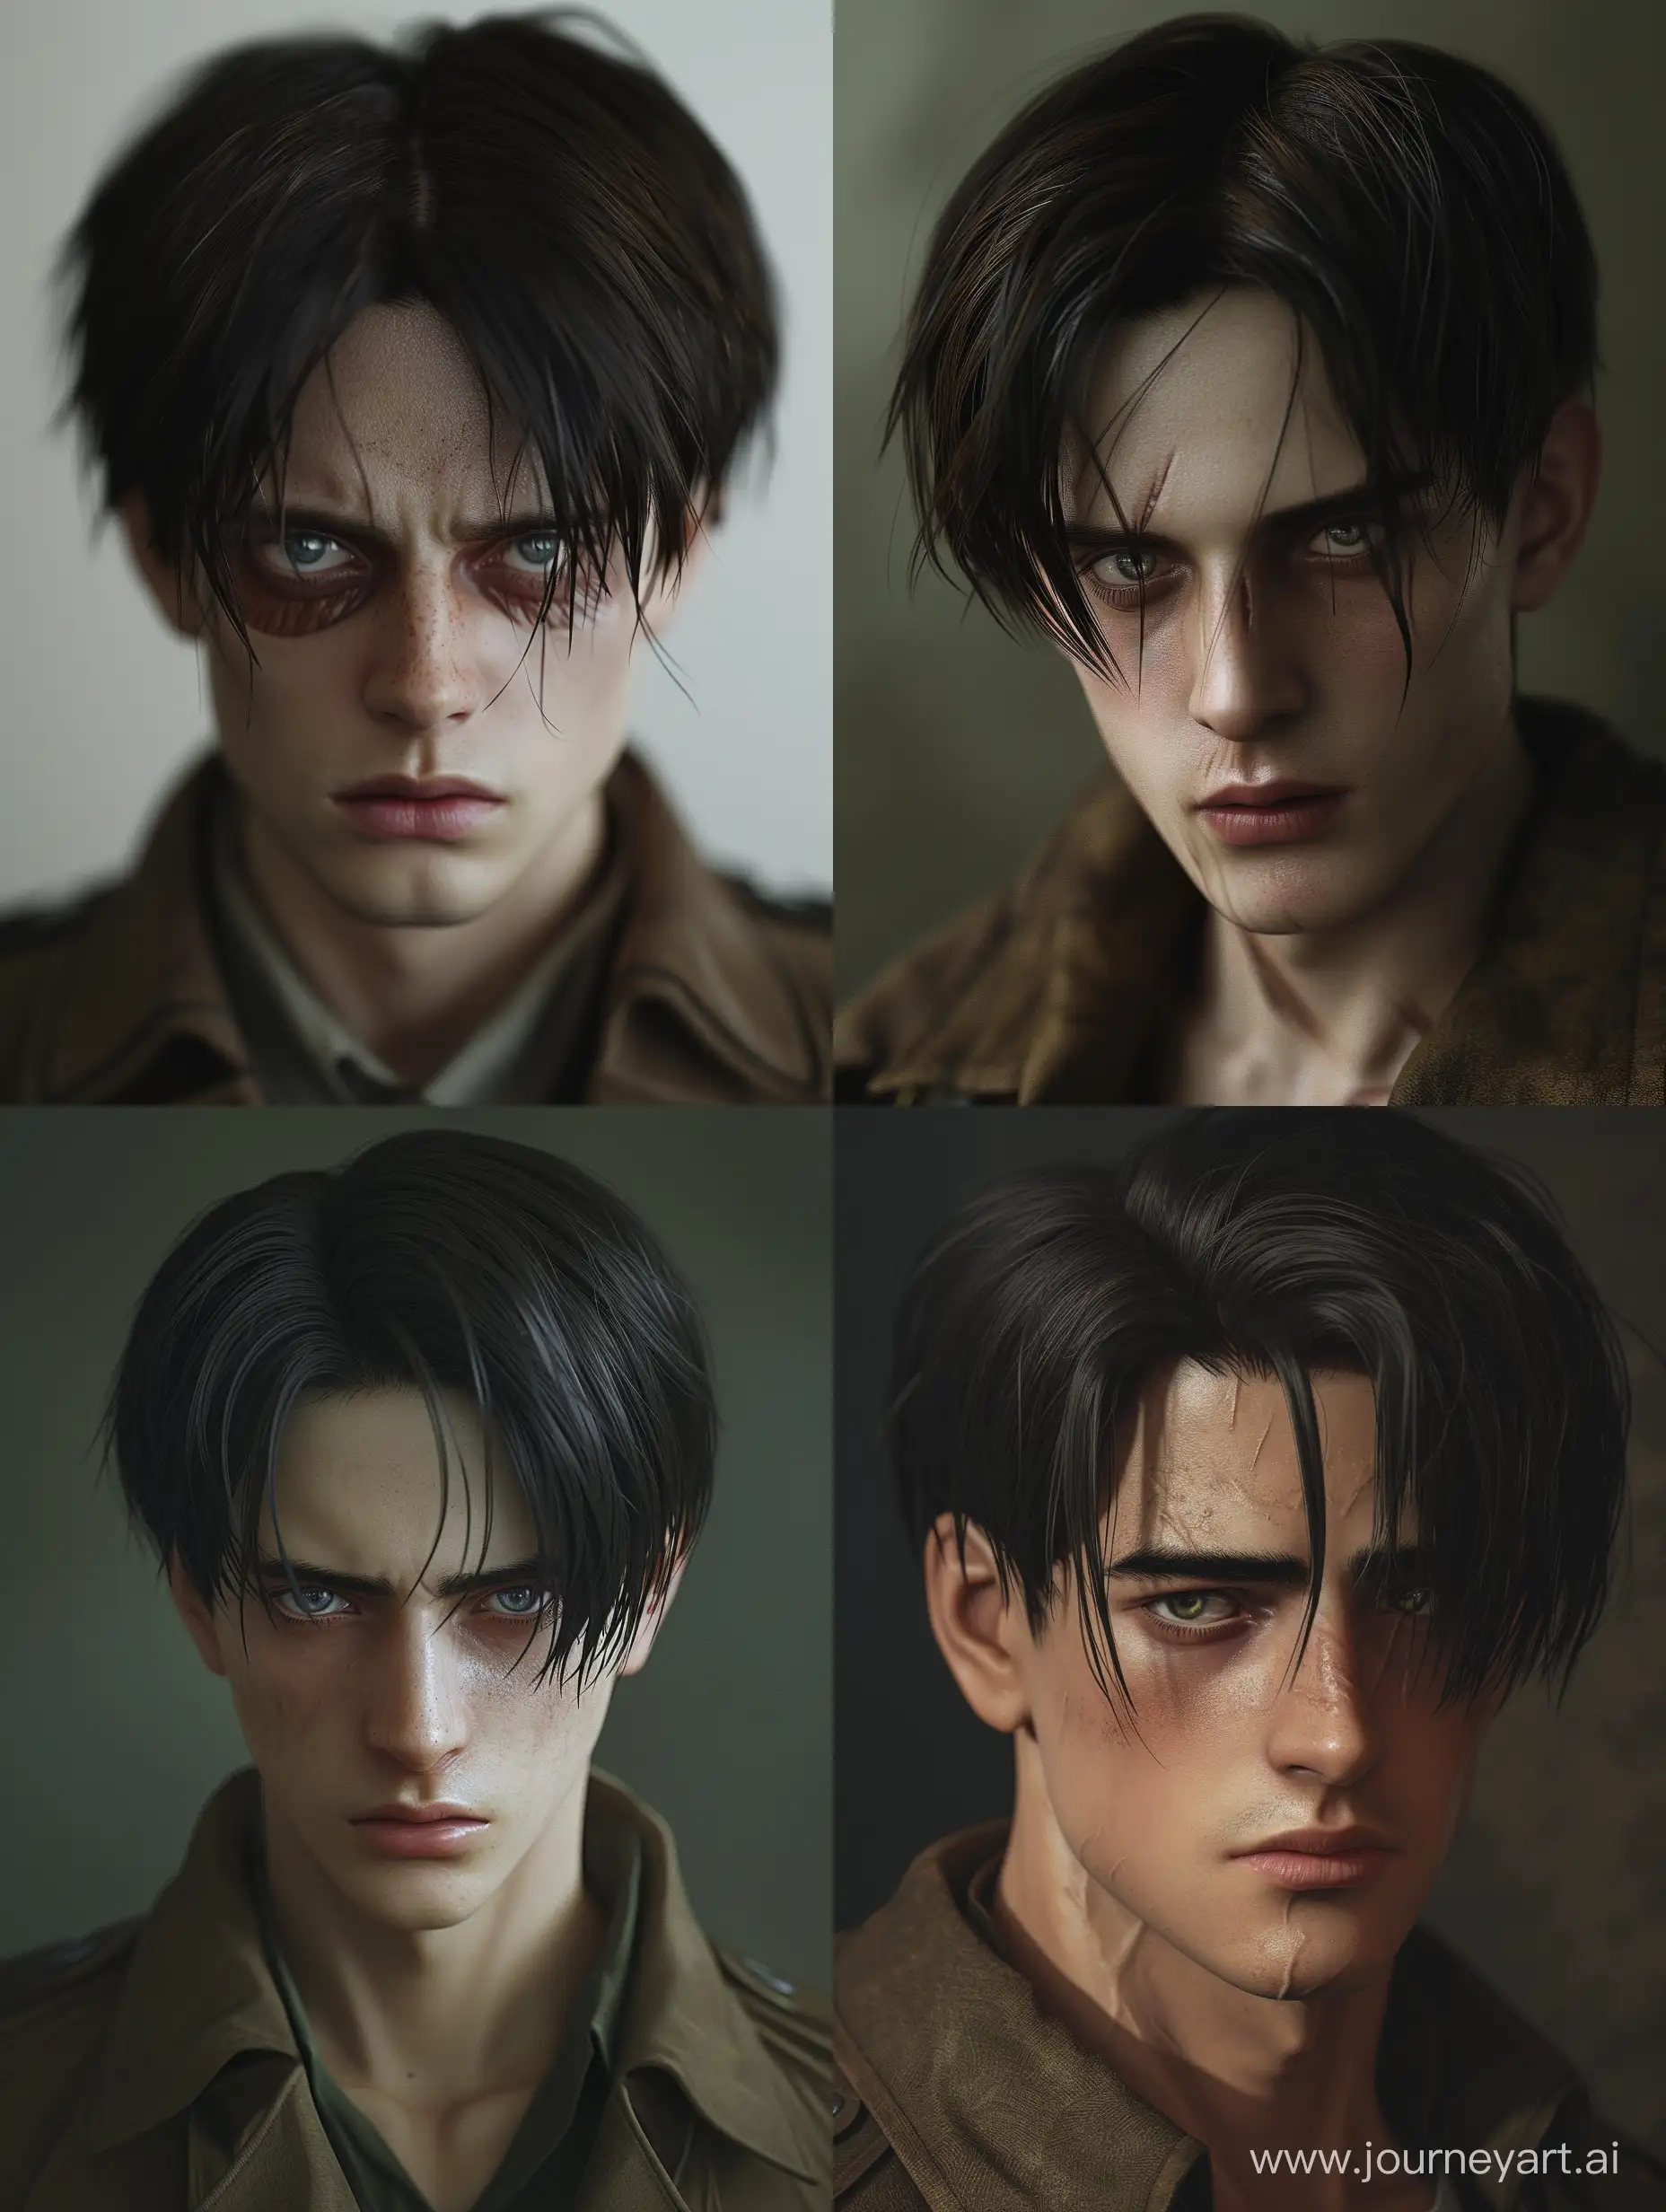 Hyper Realistic Levi Ackerman from Attack on Titan, in his 30s, with normal dark circles, slight mocking smirk, narrow bored eyes with prominent whites